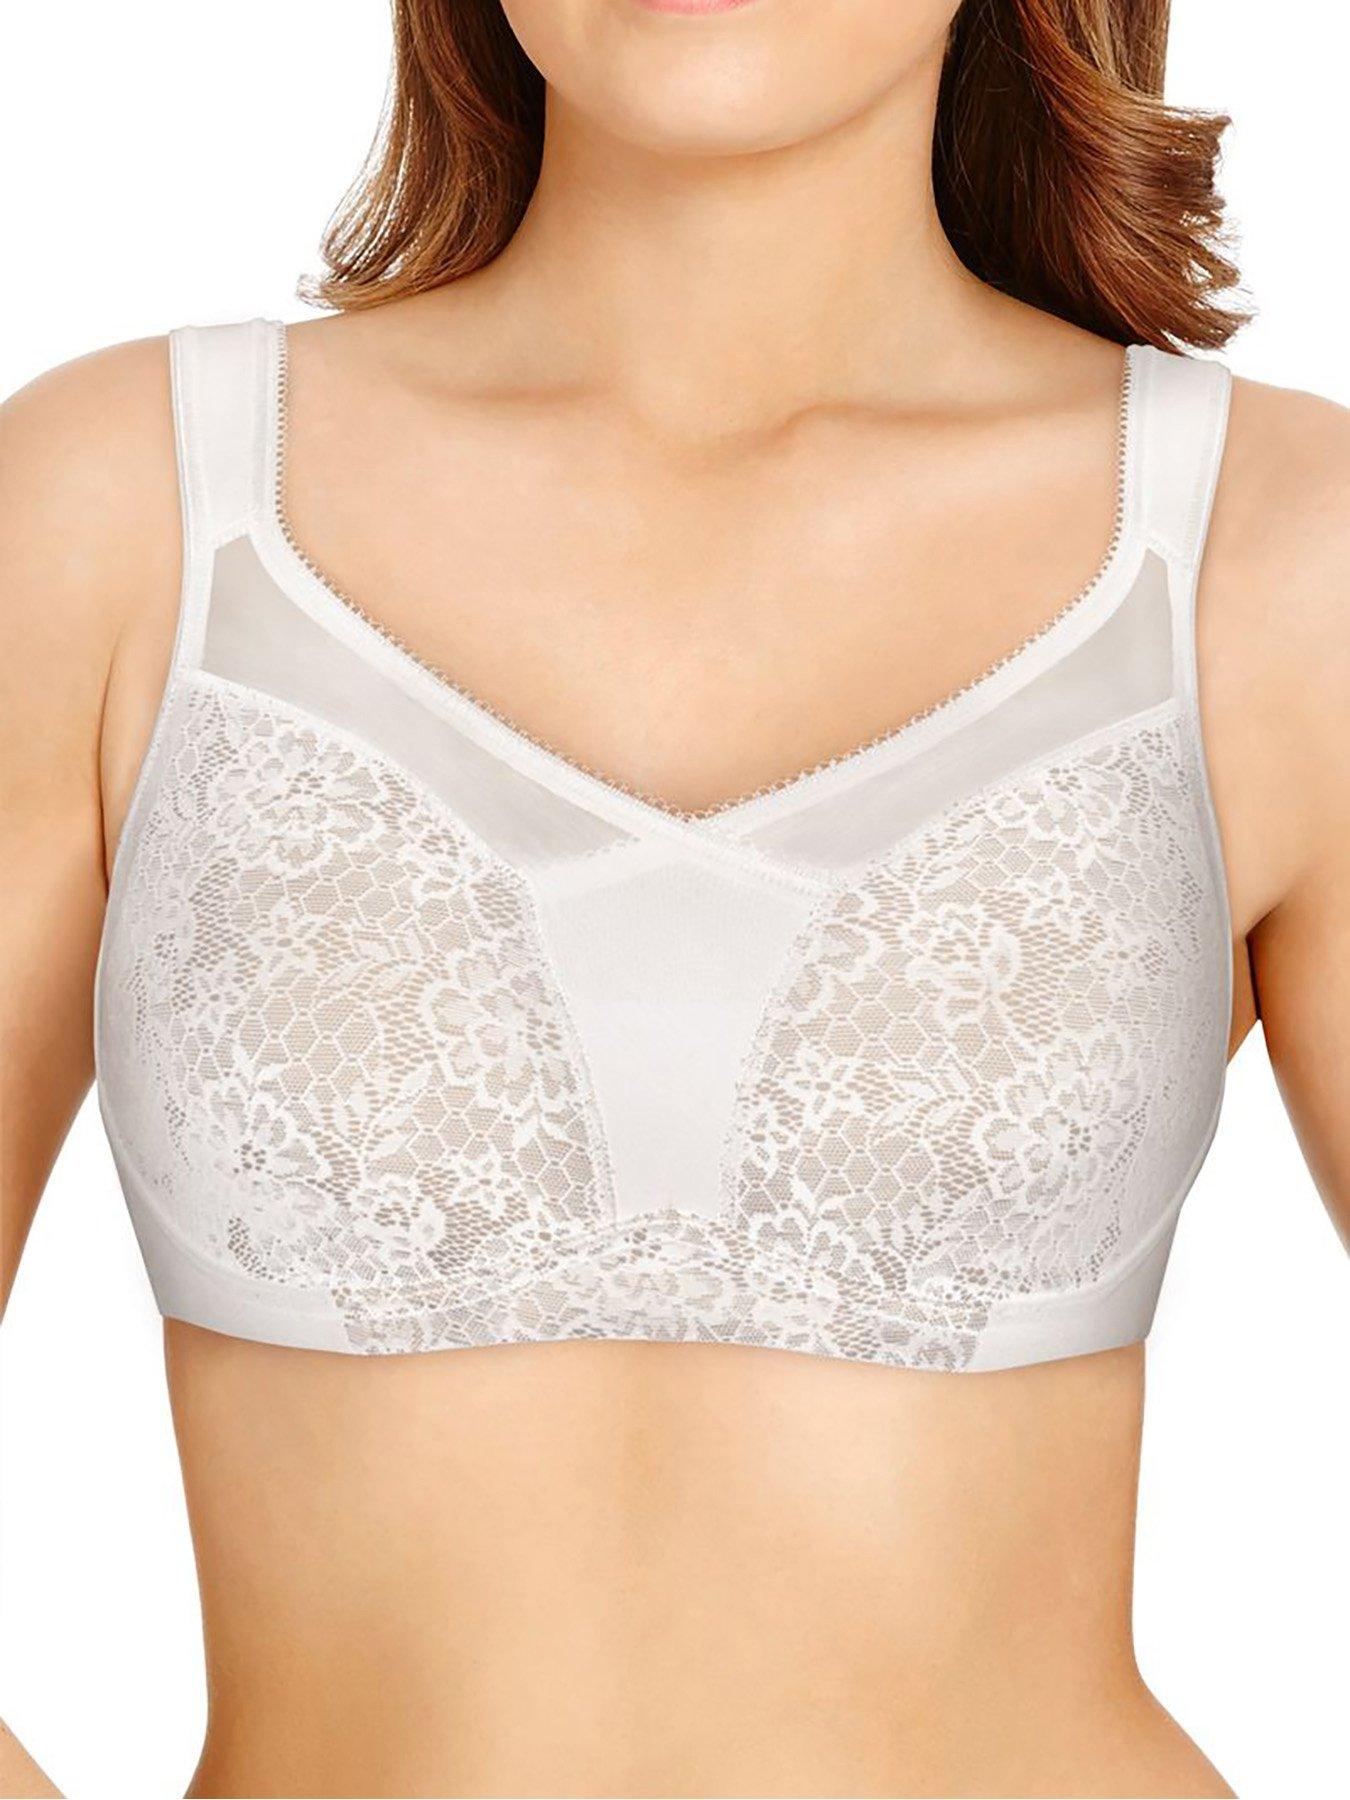 Berlei Classic Non-Wired Support Bra - Belle Lingerie